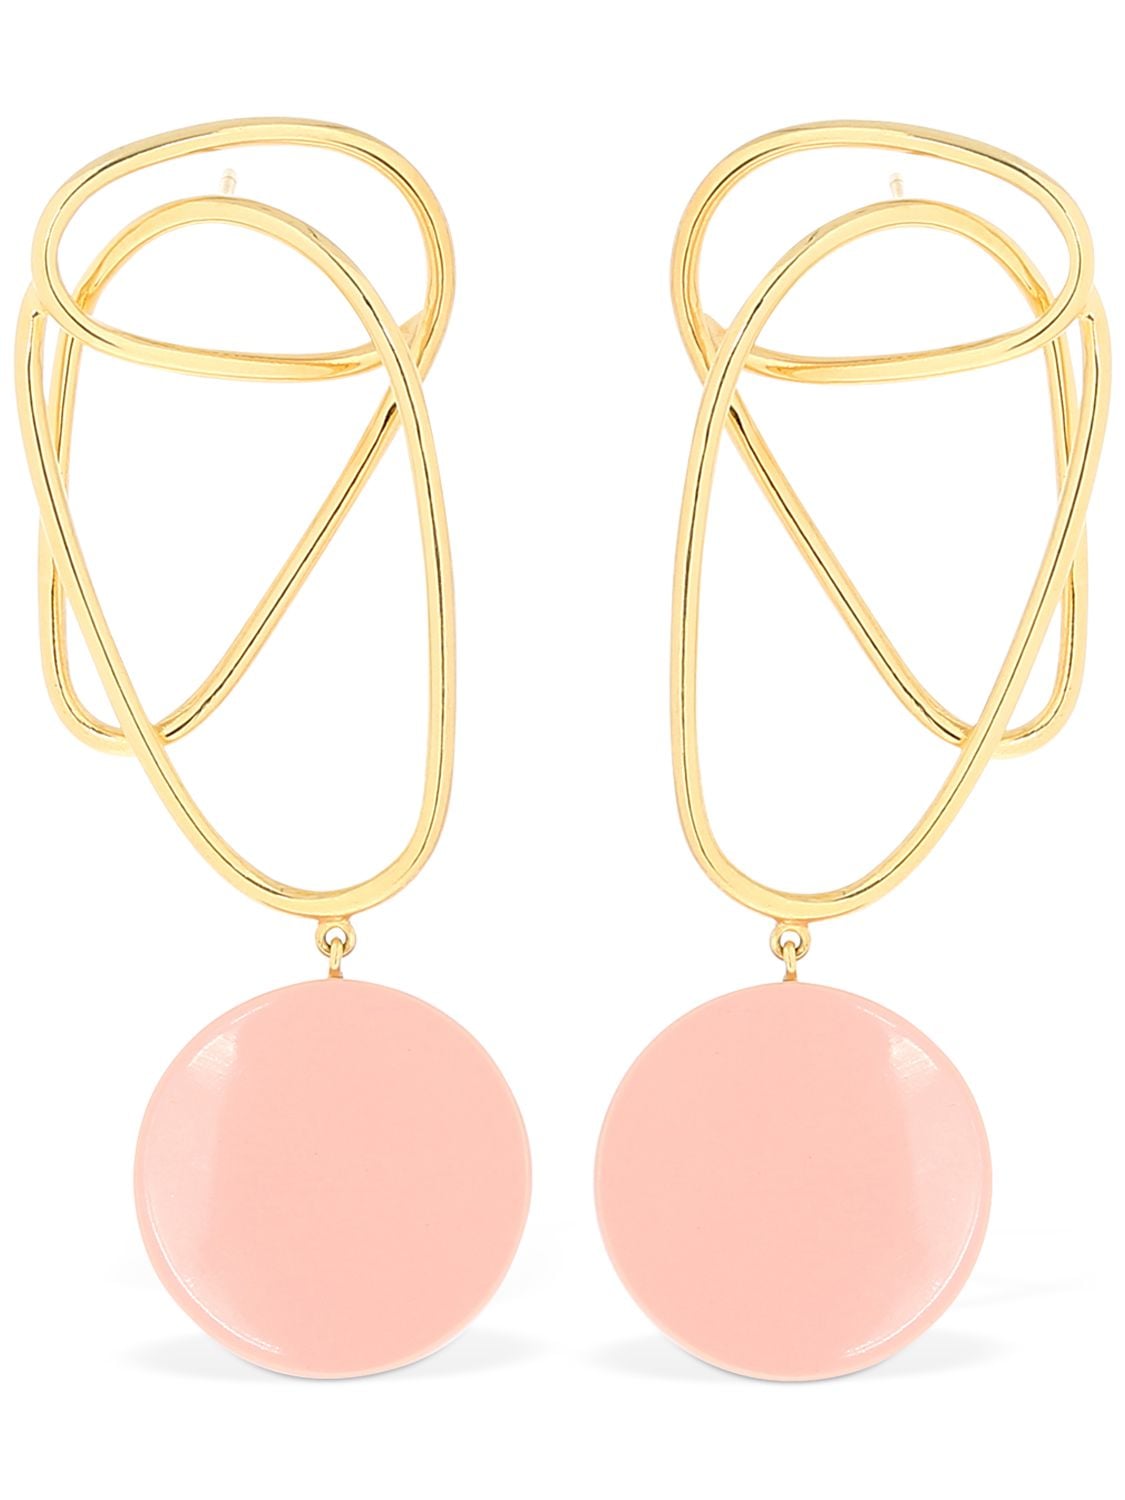 Joanna Laura Constantine Tribal Statement Earrings In Gold,pink